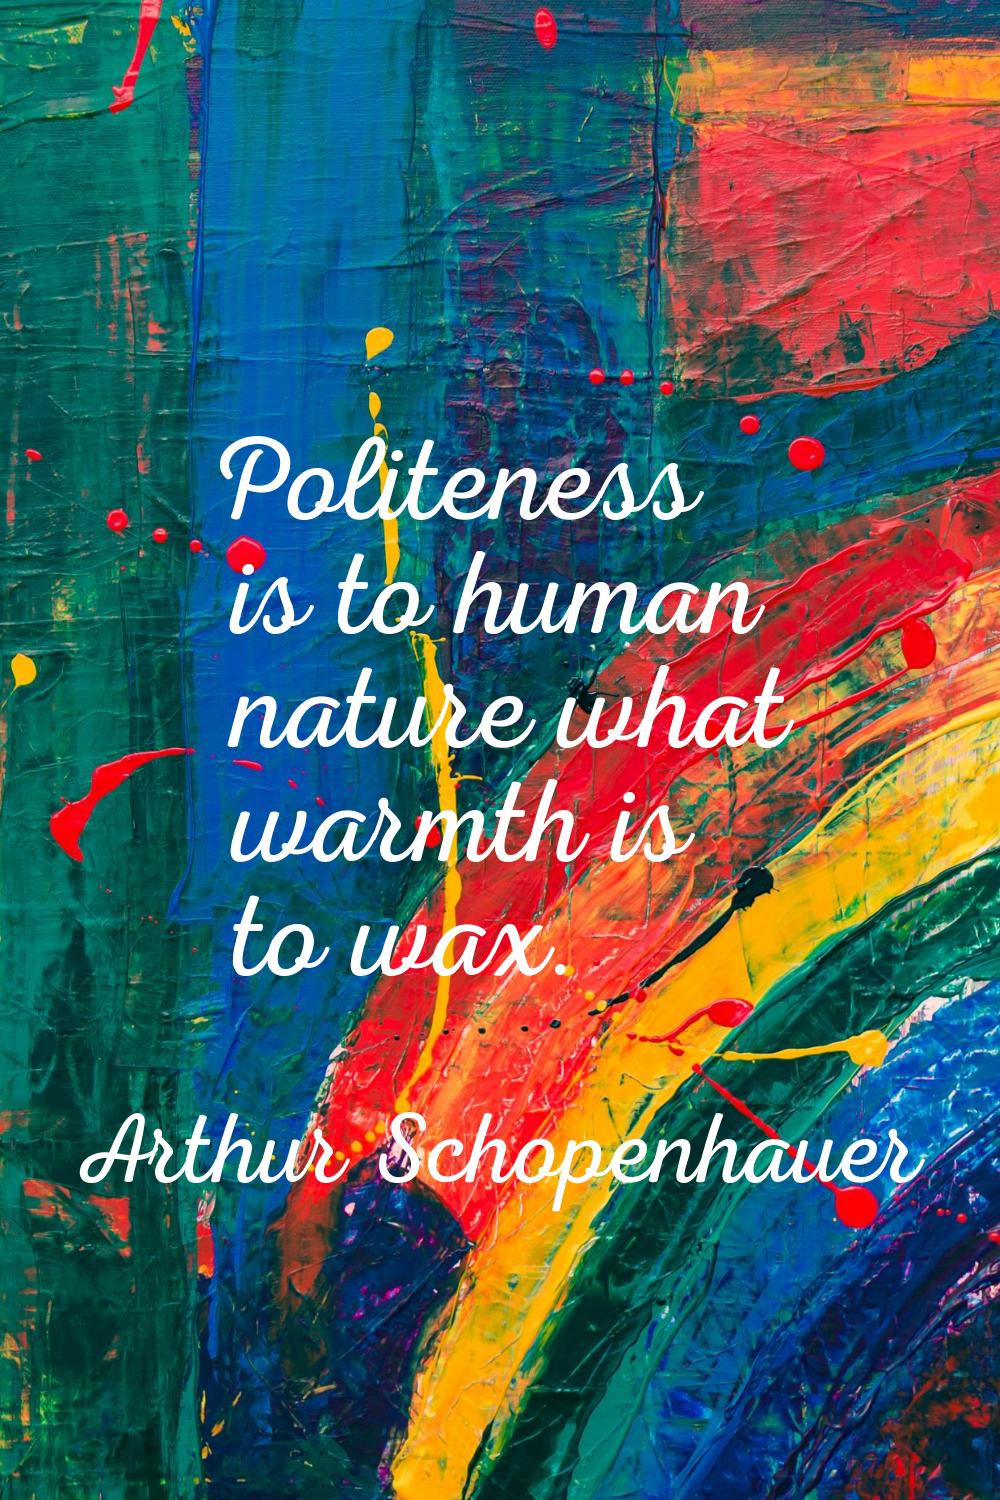 Politeness is to human nature what warmth is to wax.